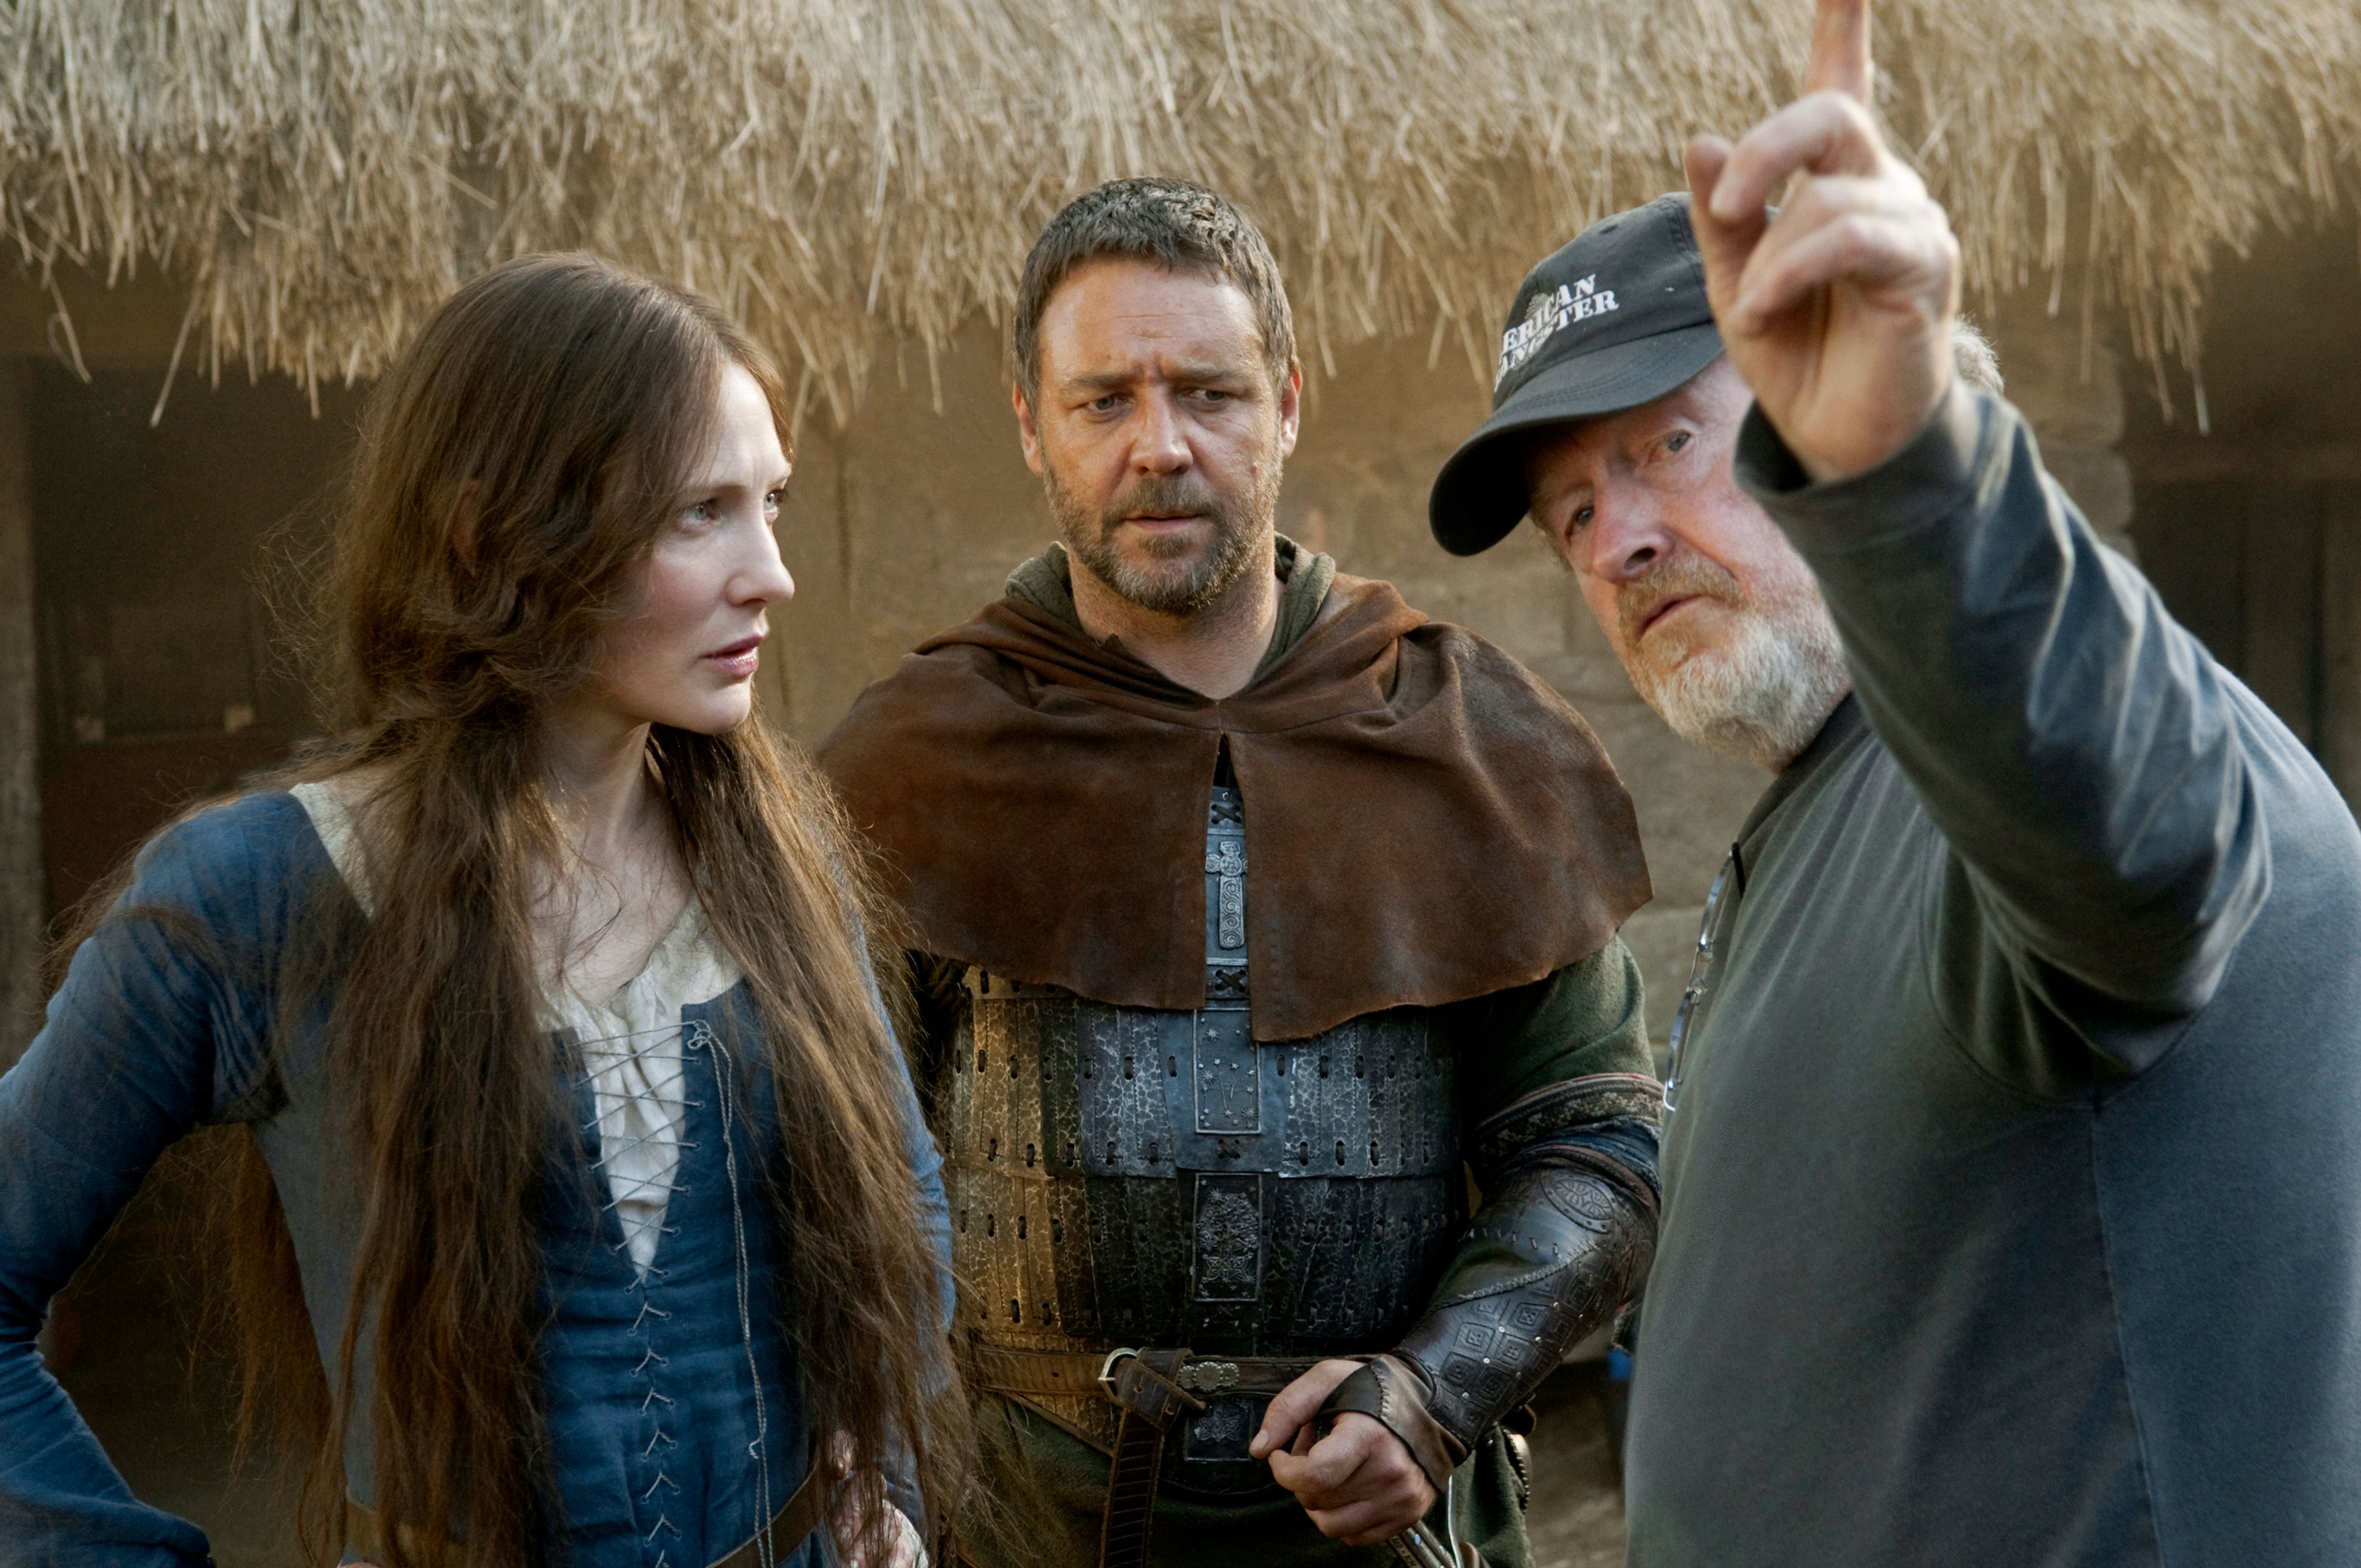 Cate Blanchett, Russell Crowe and Ridley Scott on the set of Robin Hood